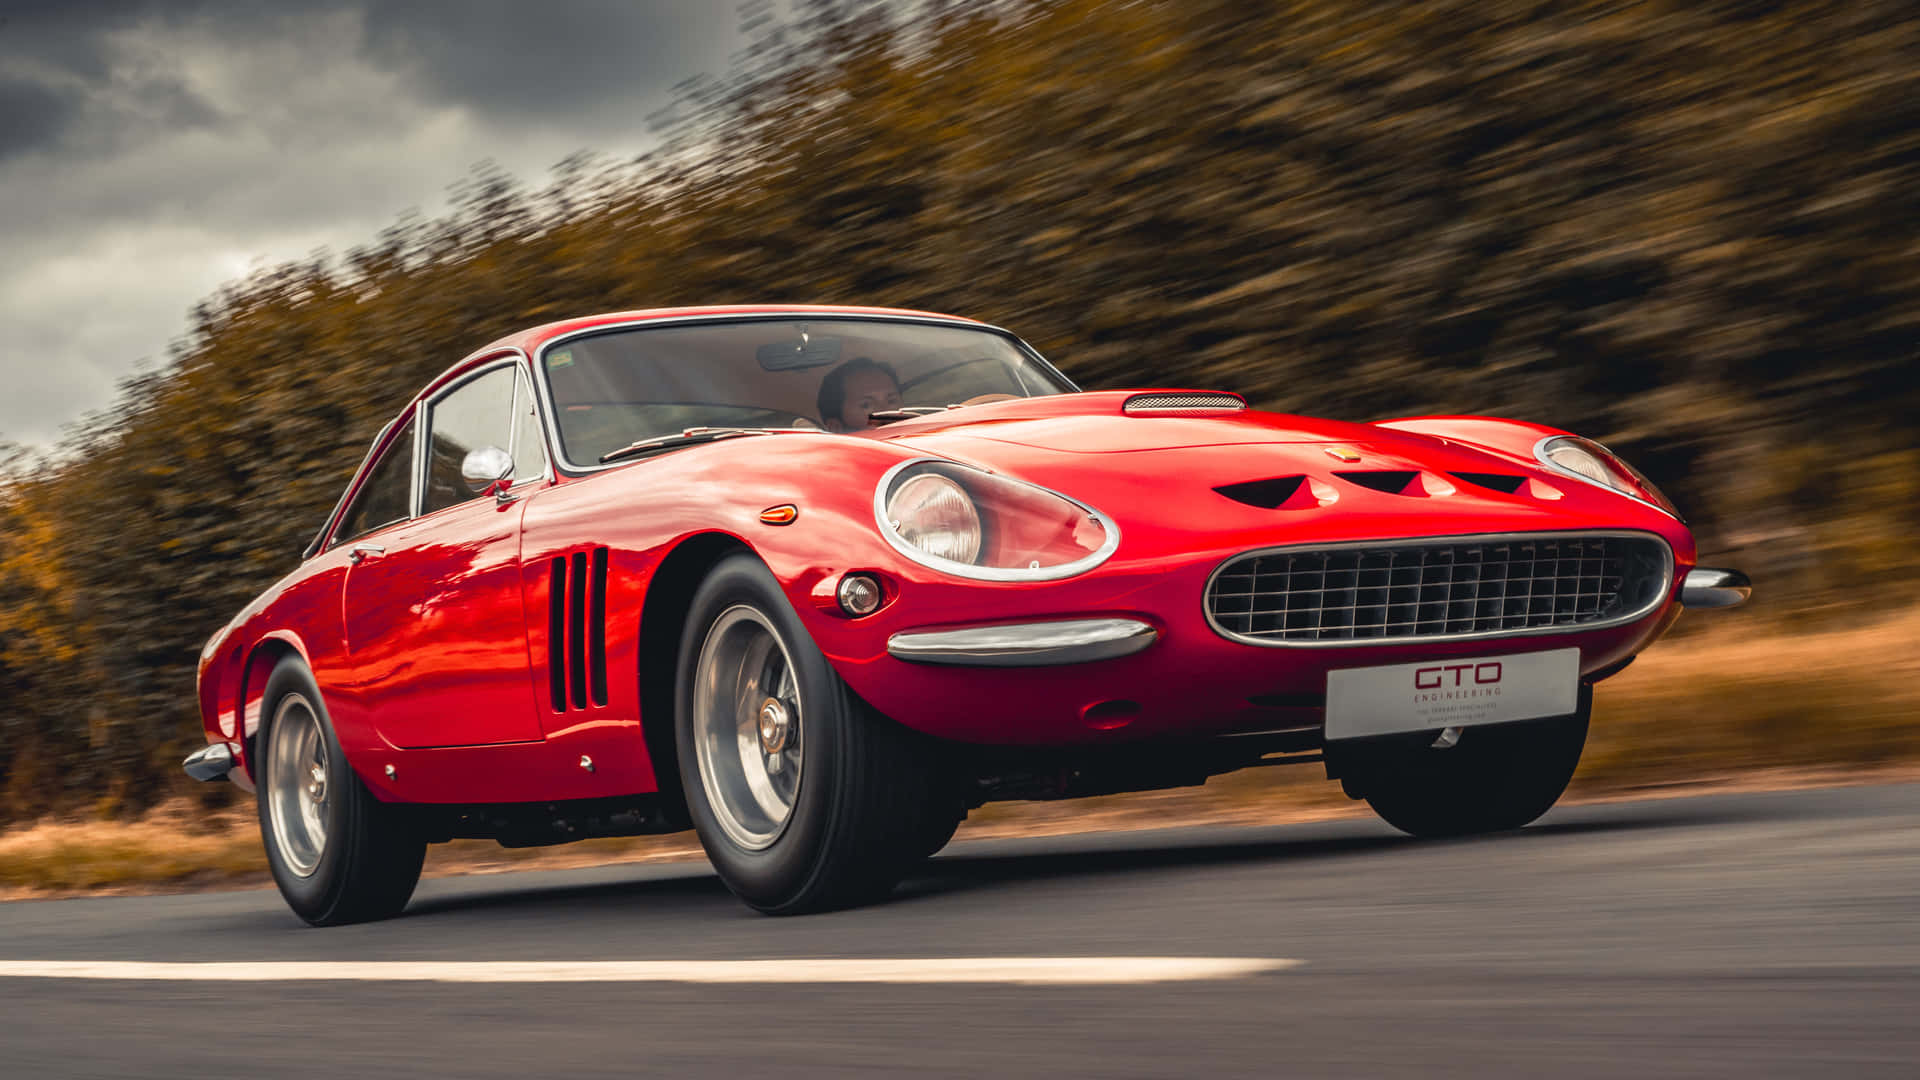 Classic Ferrari - One of the Most Iconic Luxury Sports Cars Wallpaper